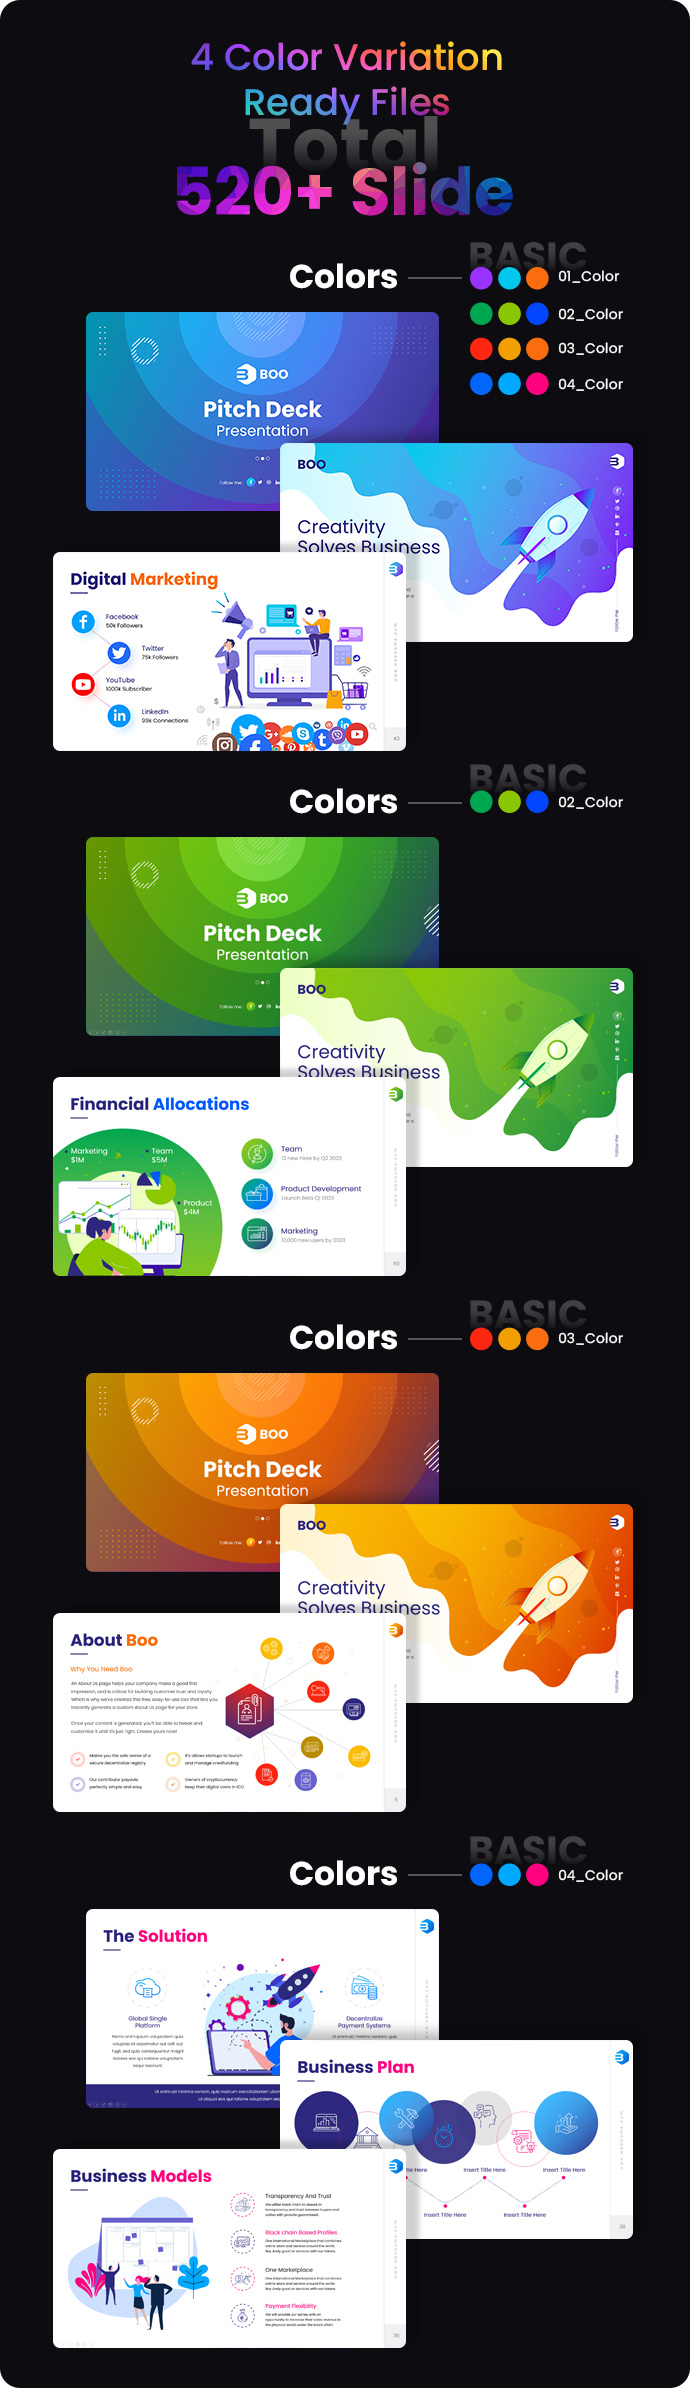 BOO - Pitch Deck PowerPoint Presentation Template - 3